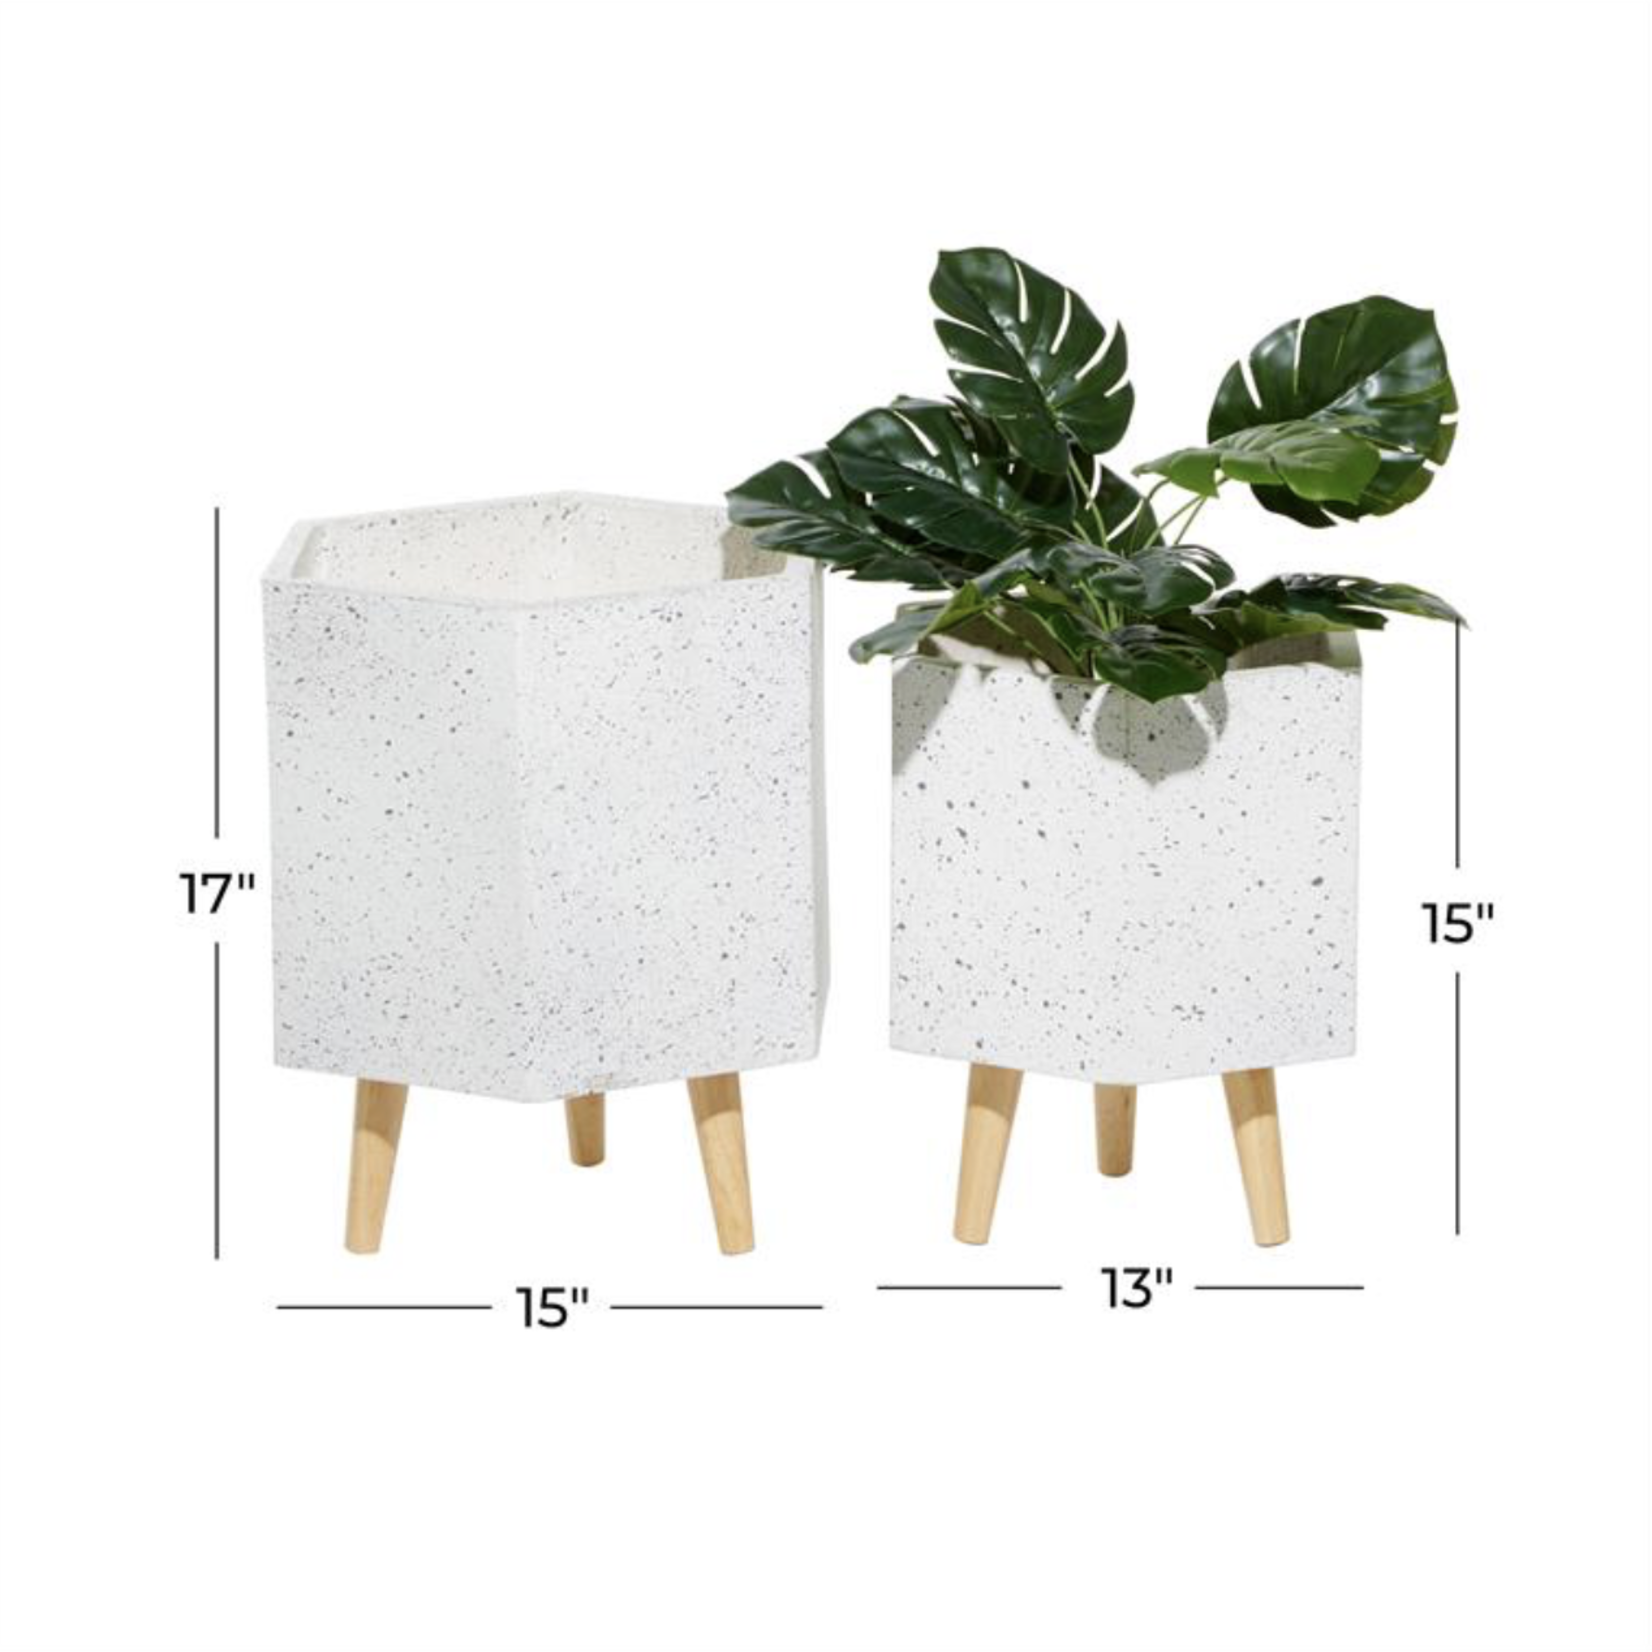 17”H X 15” X 13” LARGE WHITE HEXAGON MAGNESIUM OXIDE CONTEMPORARY PLANTER(NOT WATER TIGHT)